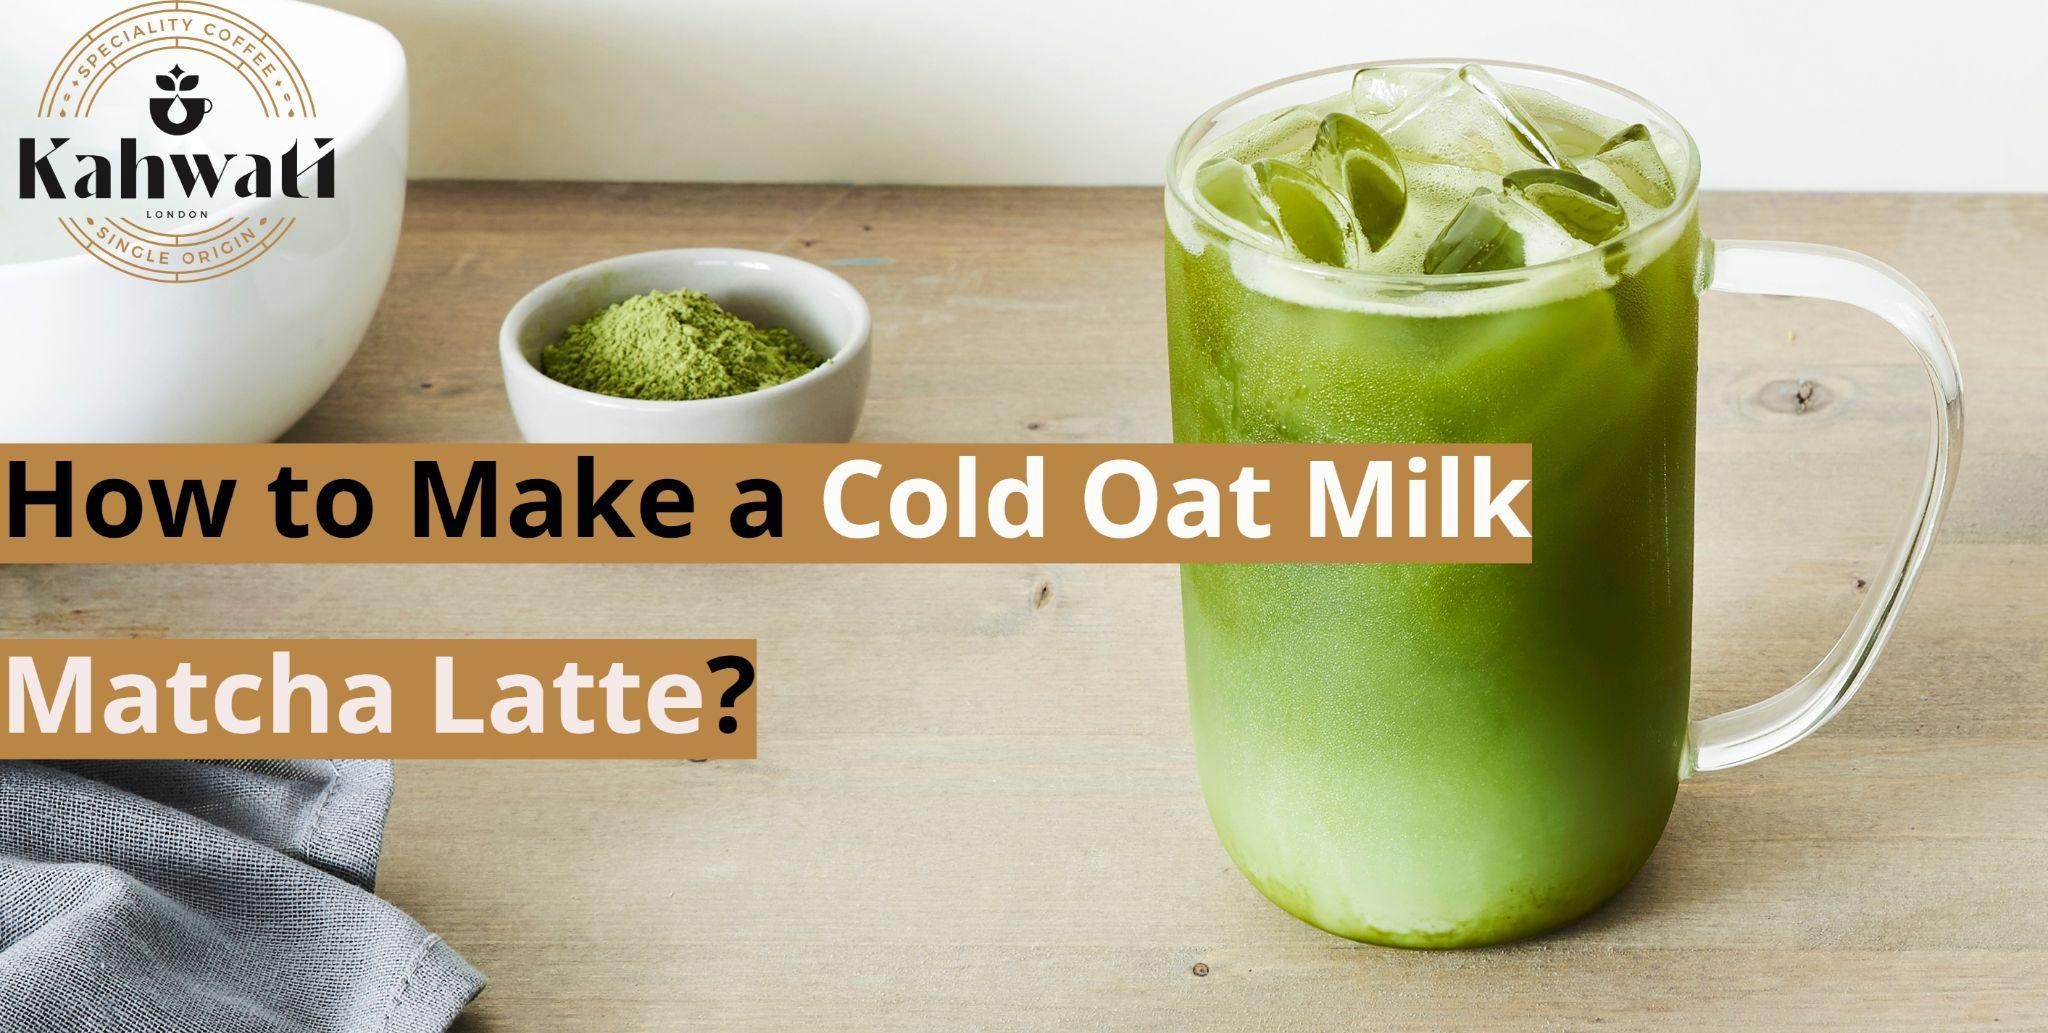 How to Make a Cold Oat Milk Matcha Latte?